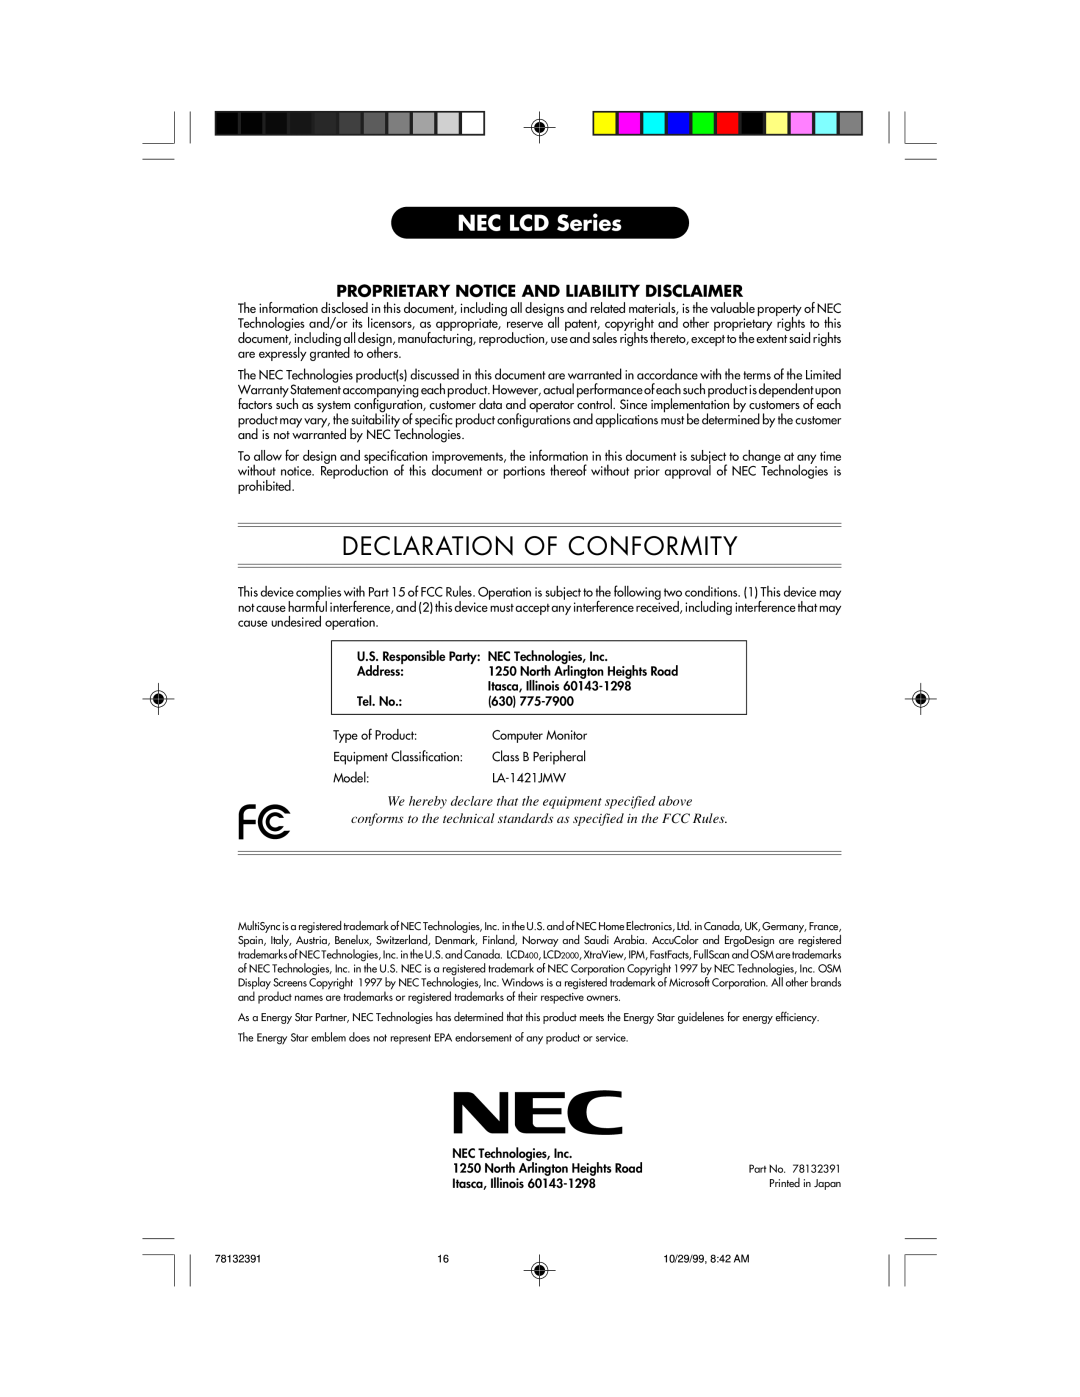 NEC LCD400 user manual Declaration Of Conformity, NEC LCD Series, Proprietary Notice And Liability Disclaimer 